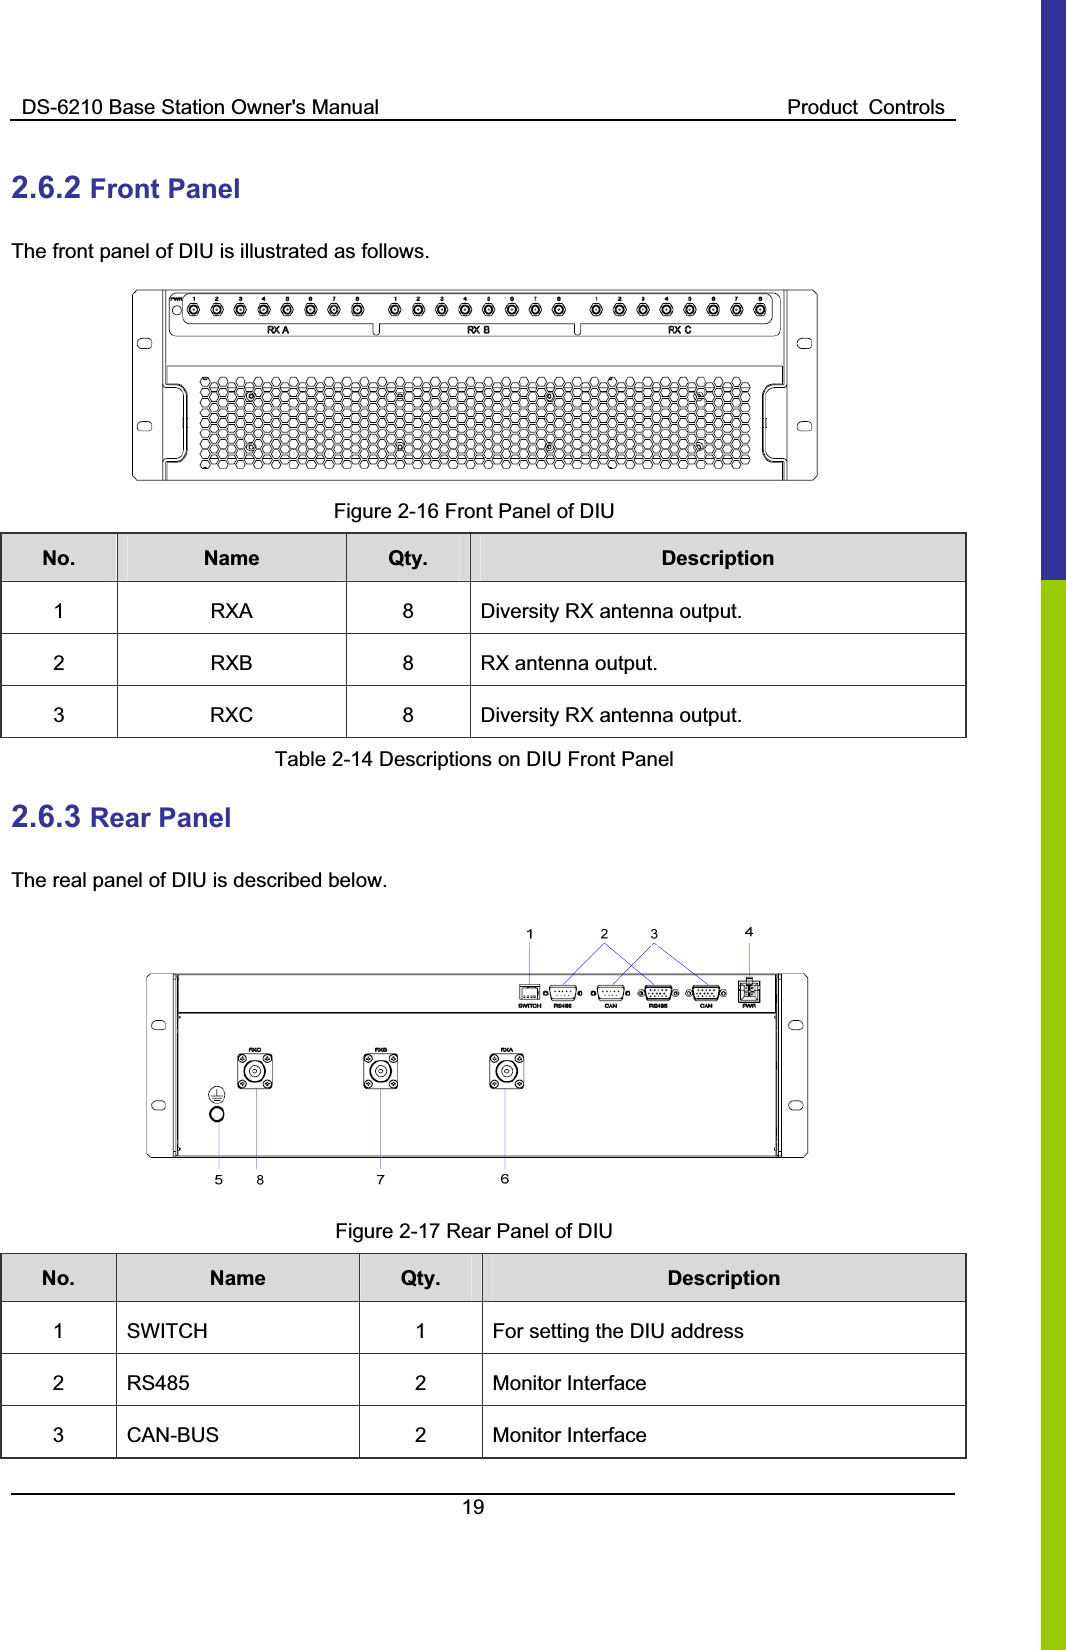 DS-6210 Base Station Owner&apos;s Manual  Product  Controls192.6.2 Front Panel   The front panel of DIU is illustrated as follows.   Figure 2-16 Front Panel of DIU No. Name    Qty.  Description 1  RXA  8  Diversity RX antenna output. 2  RXB  8  RX antenna output. 3  RXC  8  Diversity RX antenna output. Table 2-14 Descriptions on DIU Front Panel 2.6.3 Rear Panel   The real panel of DIU is described below.     Figure 2-17 Rear Panel of DIU No. Name    Qty.  Description 1  SWITCH  1  For setting the DIU address 2  RS485  2  Monitor Interface   3  CAN-BUS  2  Monitor Interface   